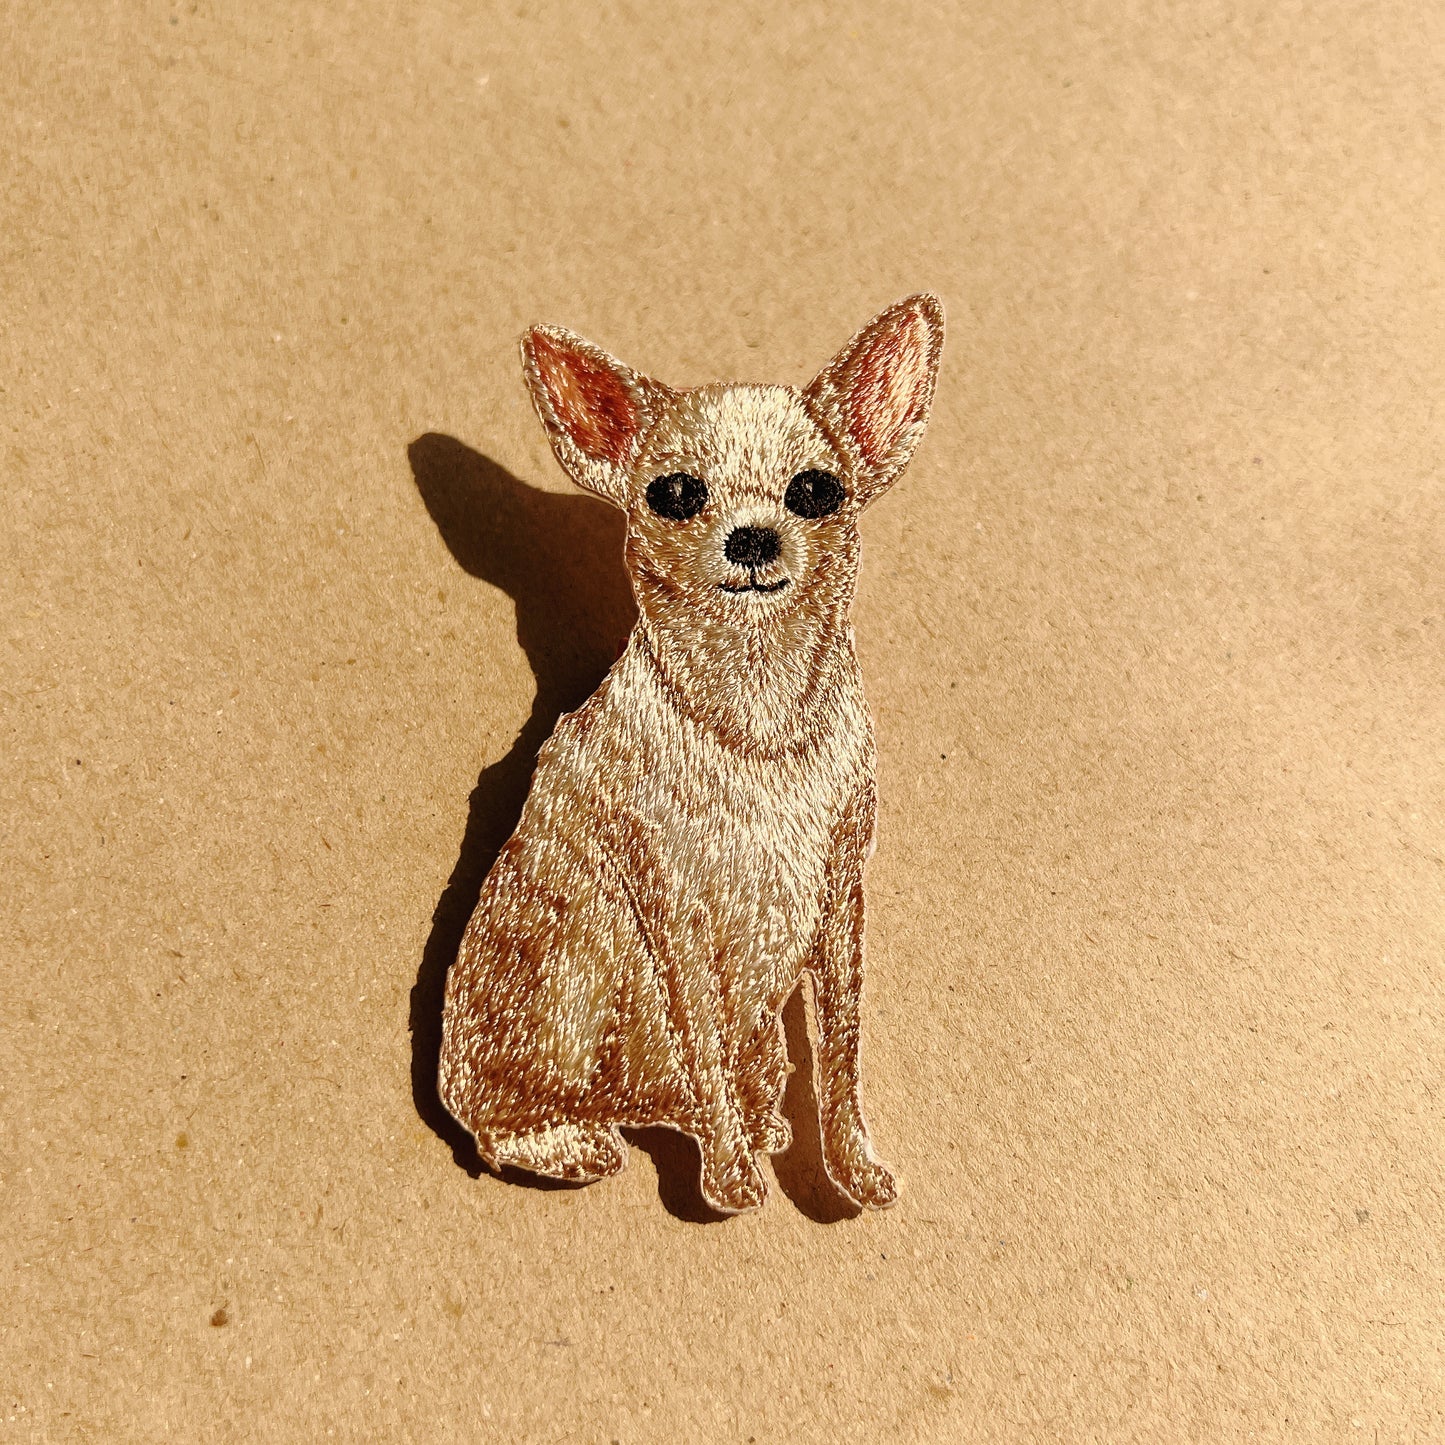 Embroidered stickers-Chihuahua